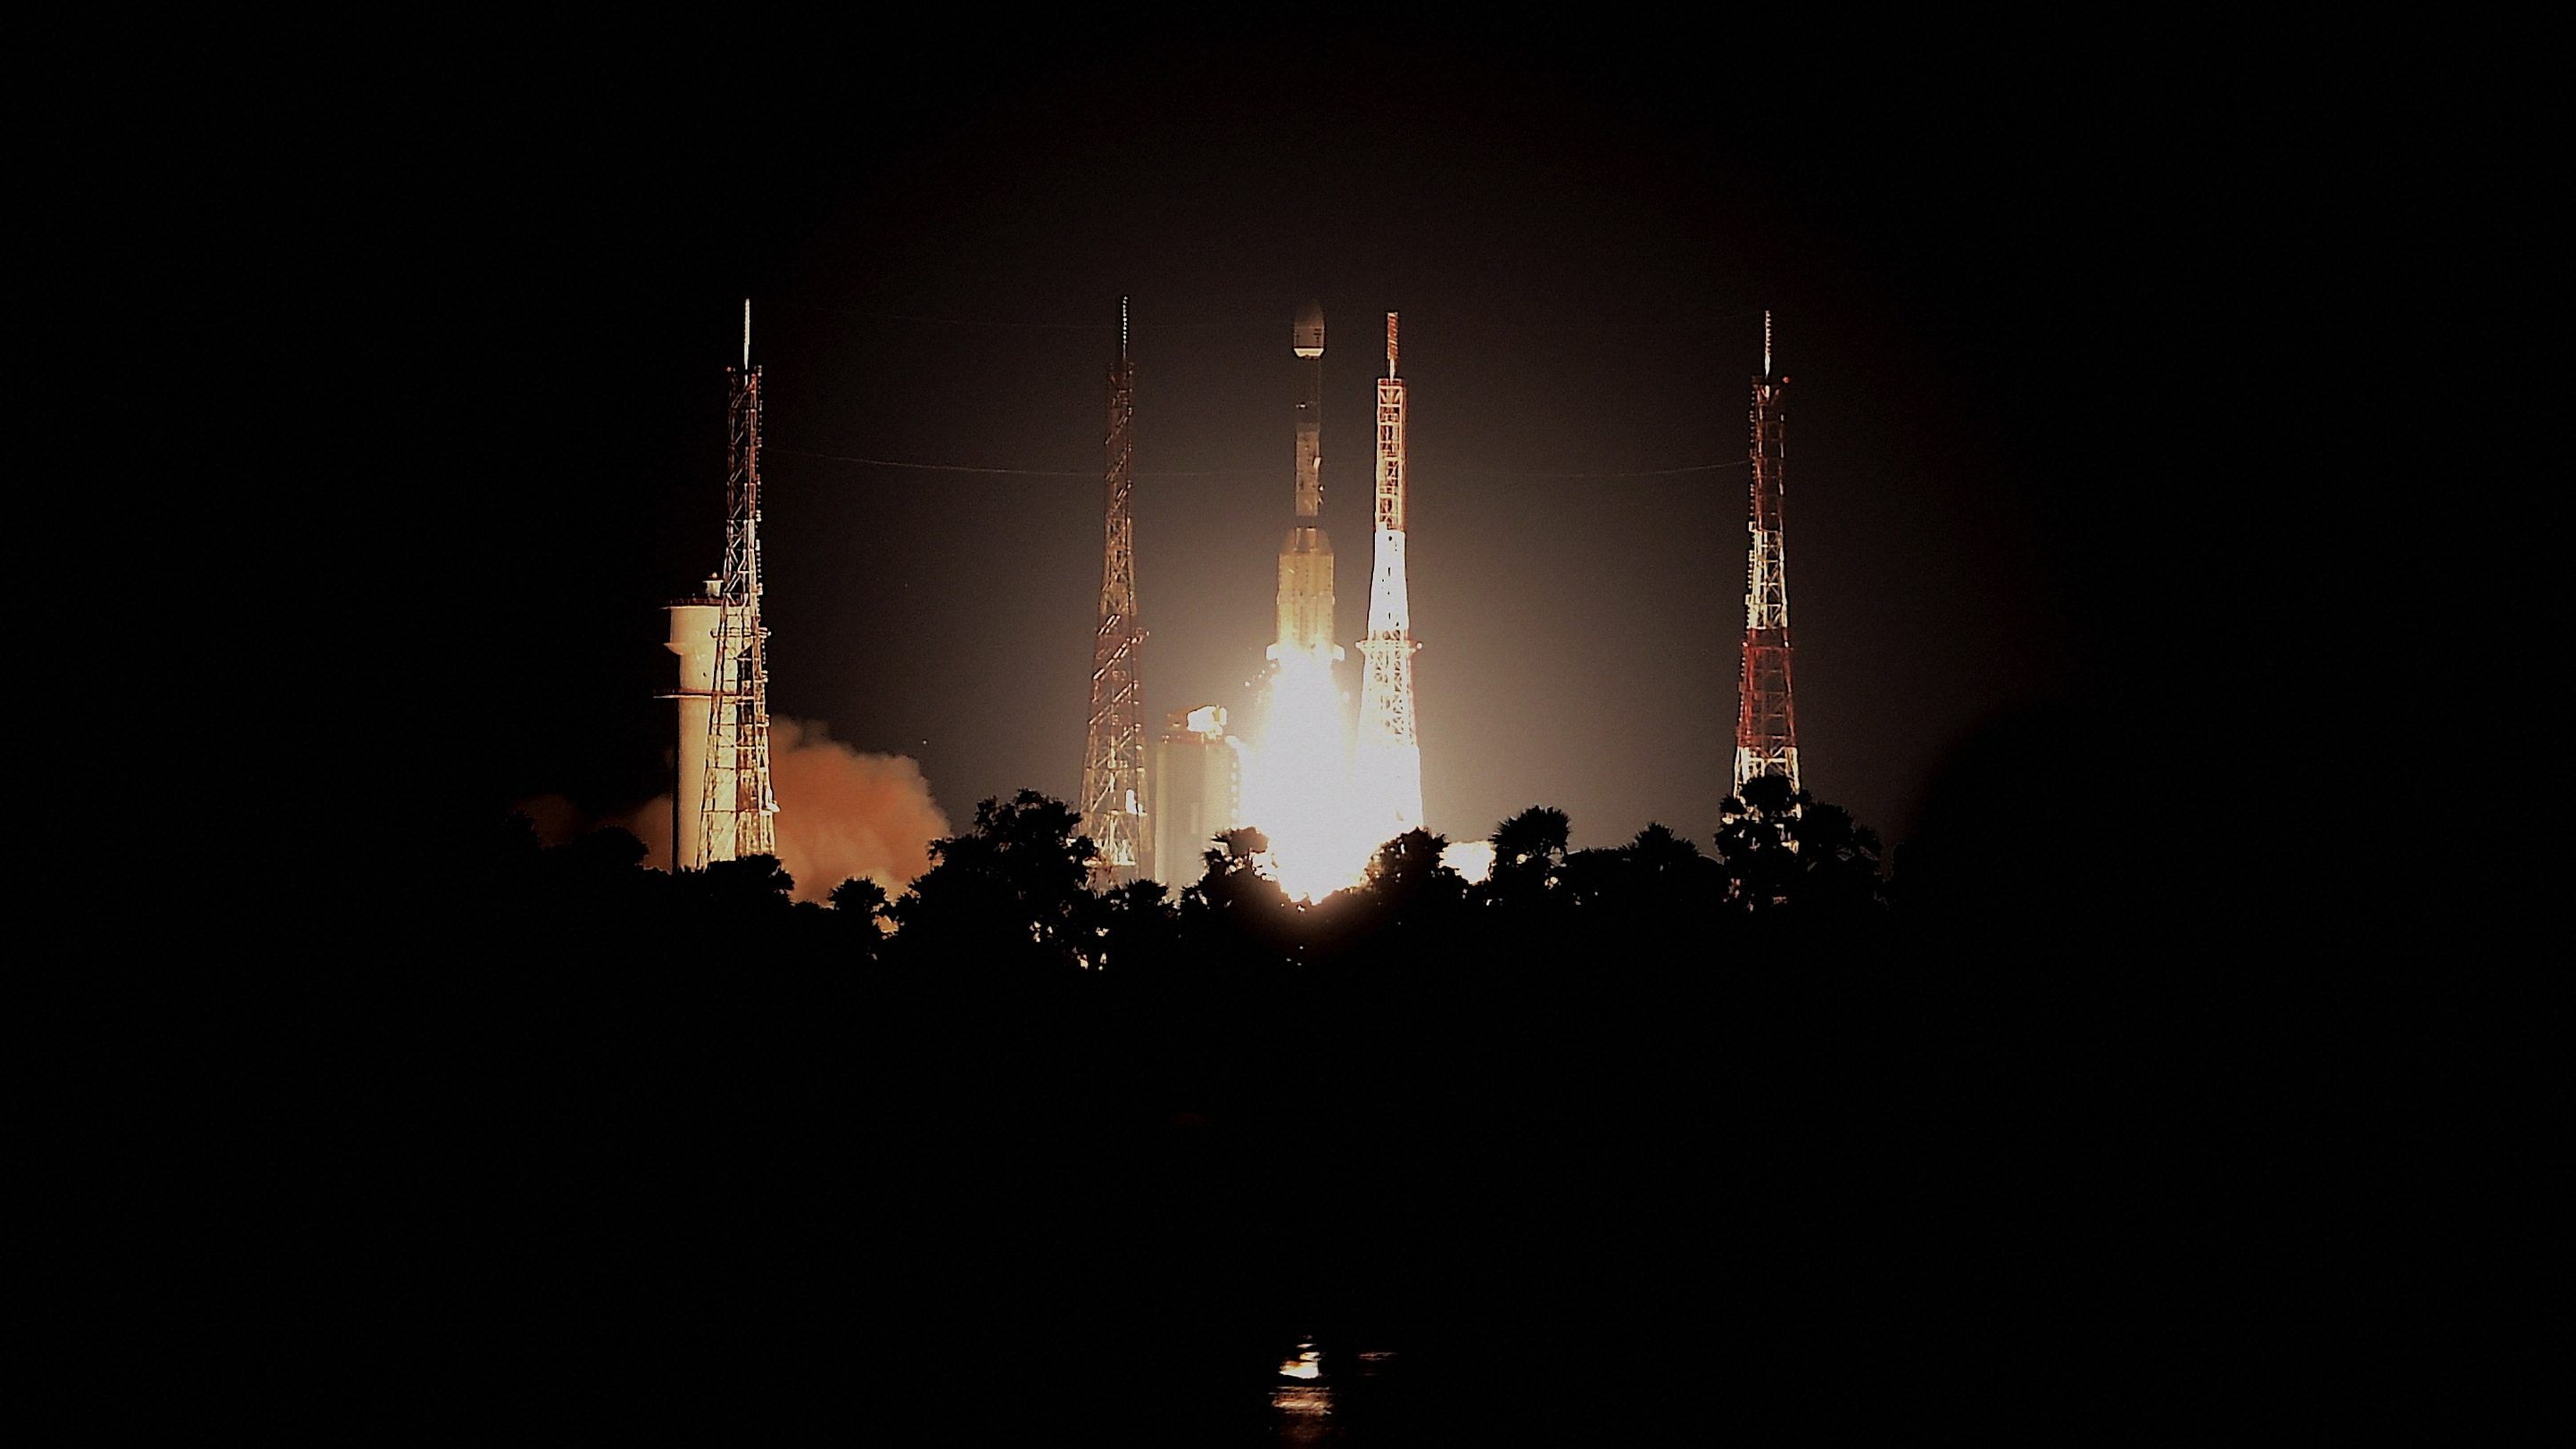 he GSLV rocket, launched in the early hours of Thursday, failed to inject into the orbit the country's latest earth observation satellite EOS-03 due to a failure to ignite the cryogenic stage of the launch vehicle, prompting the premier space agency to declare the mission could not be achieved as intended. Credit: PTI File Photo